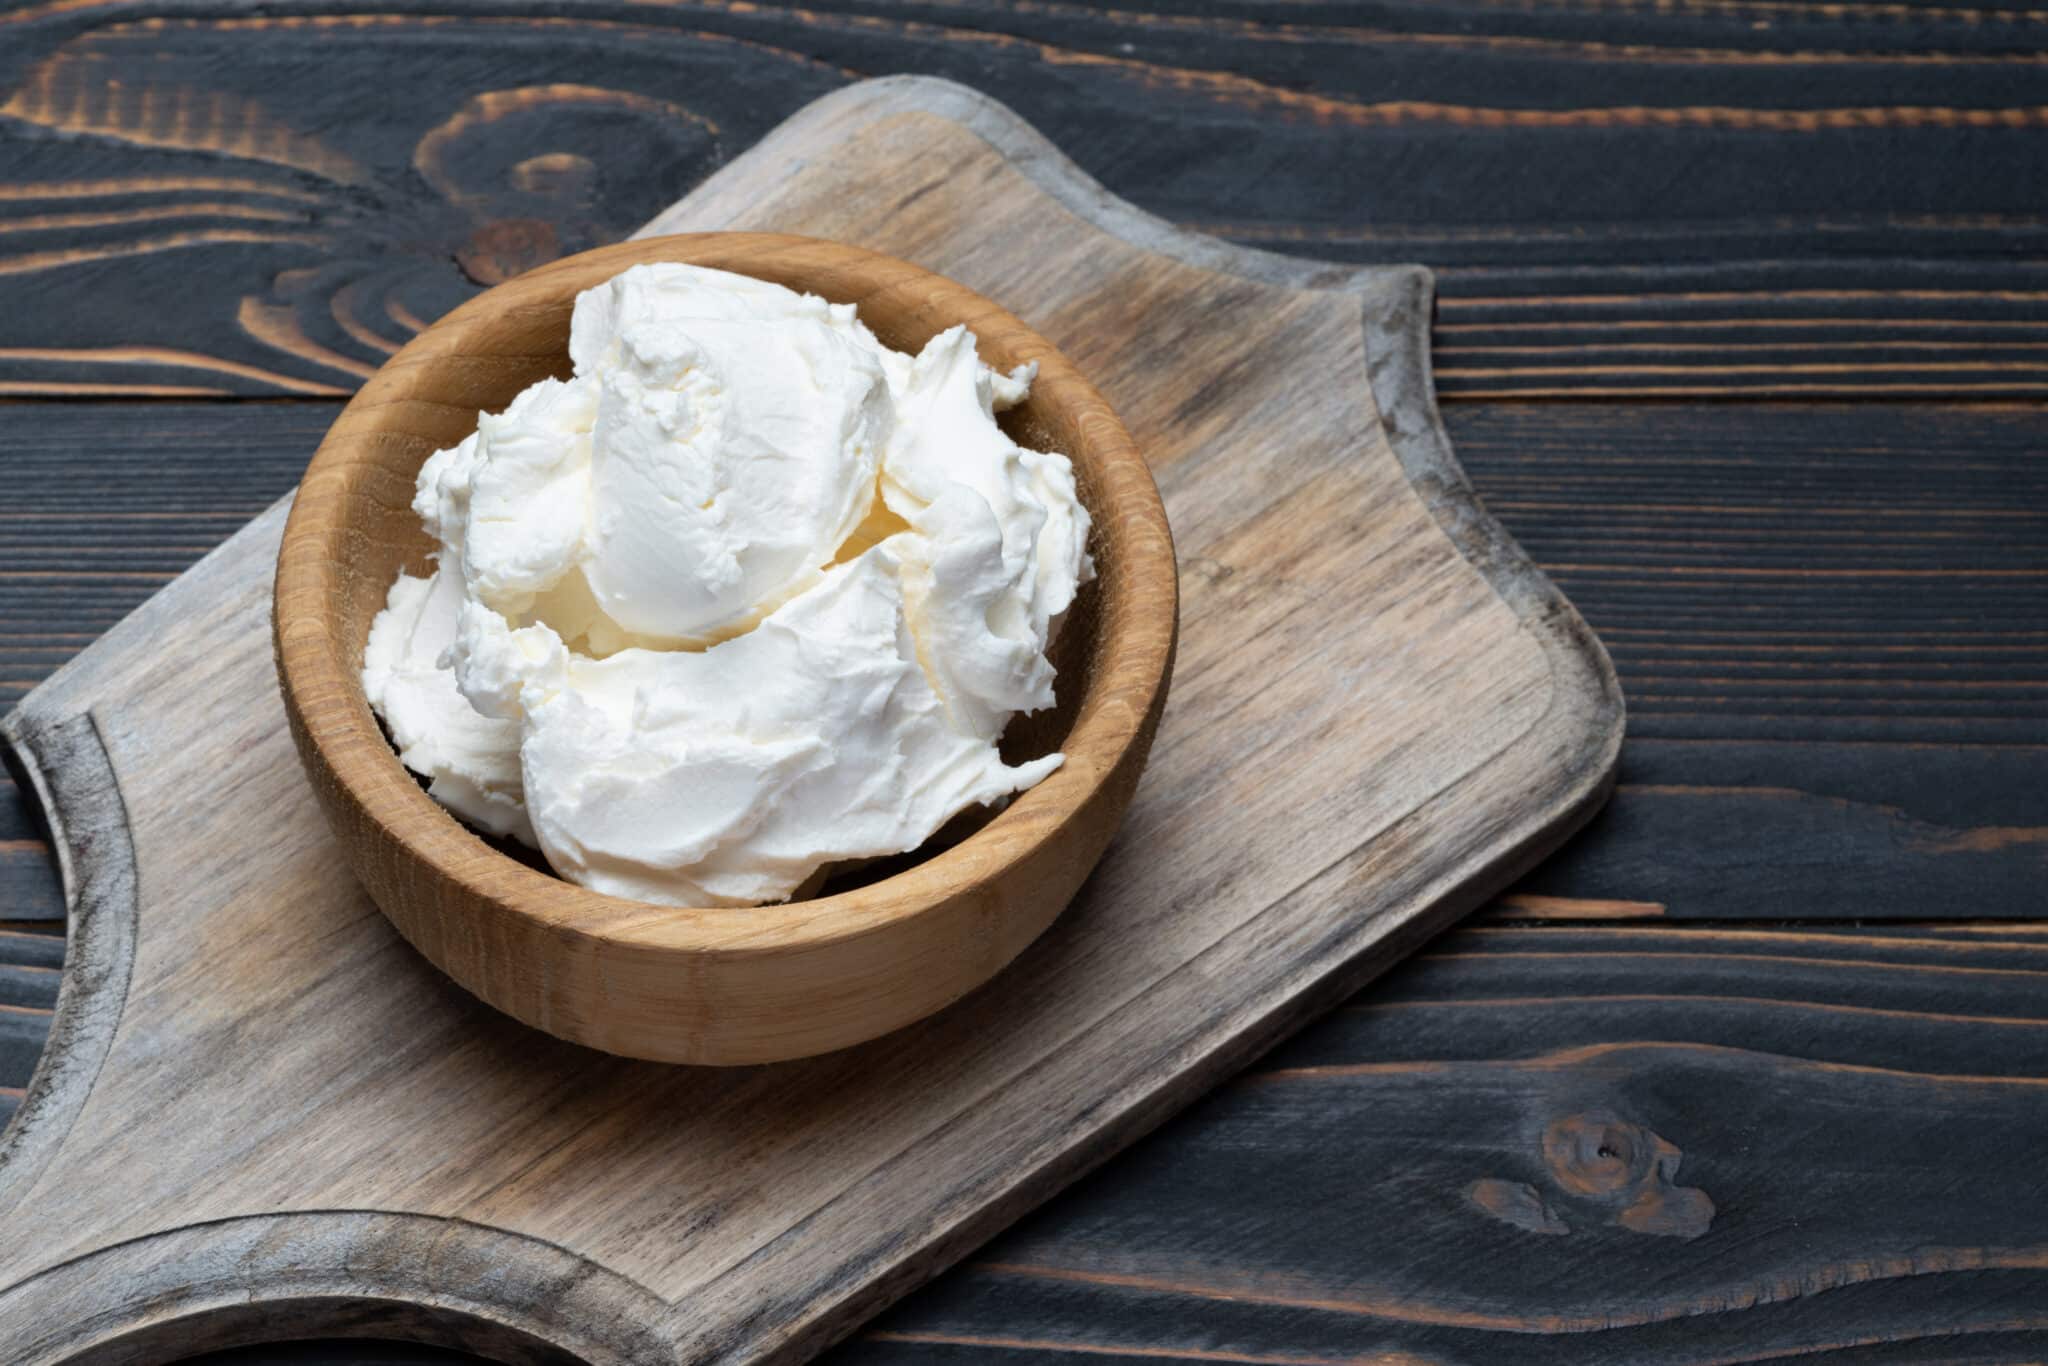 A bowl of mascarpone as a substitute for burrata cheese on a wooden cutting board.